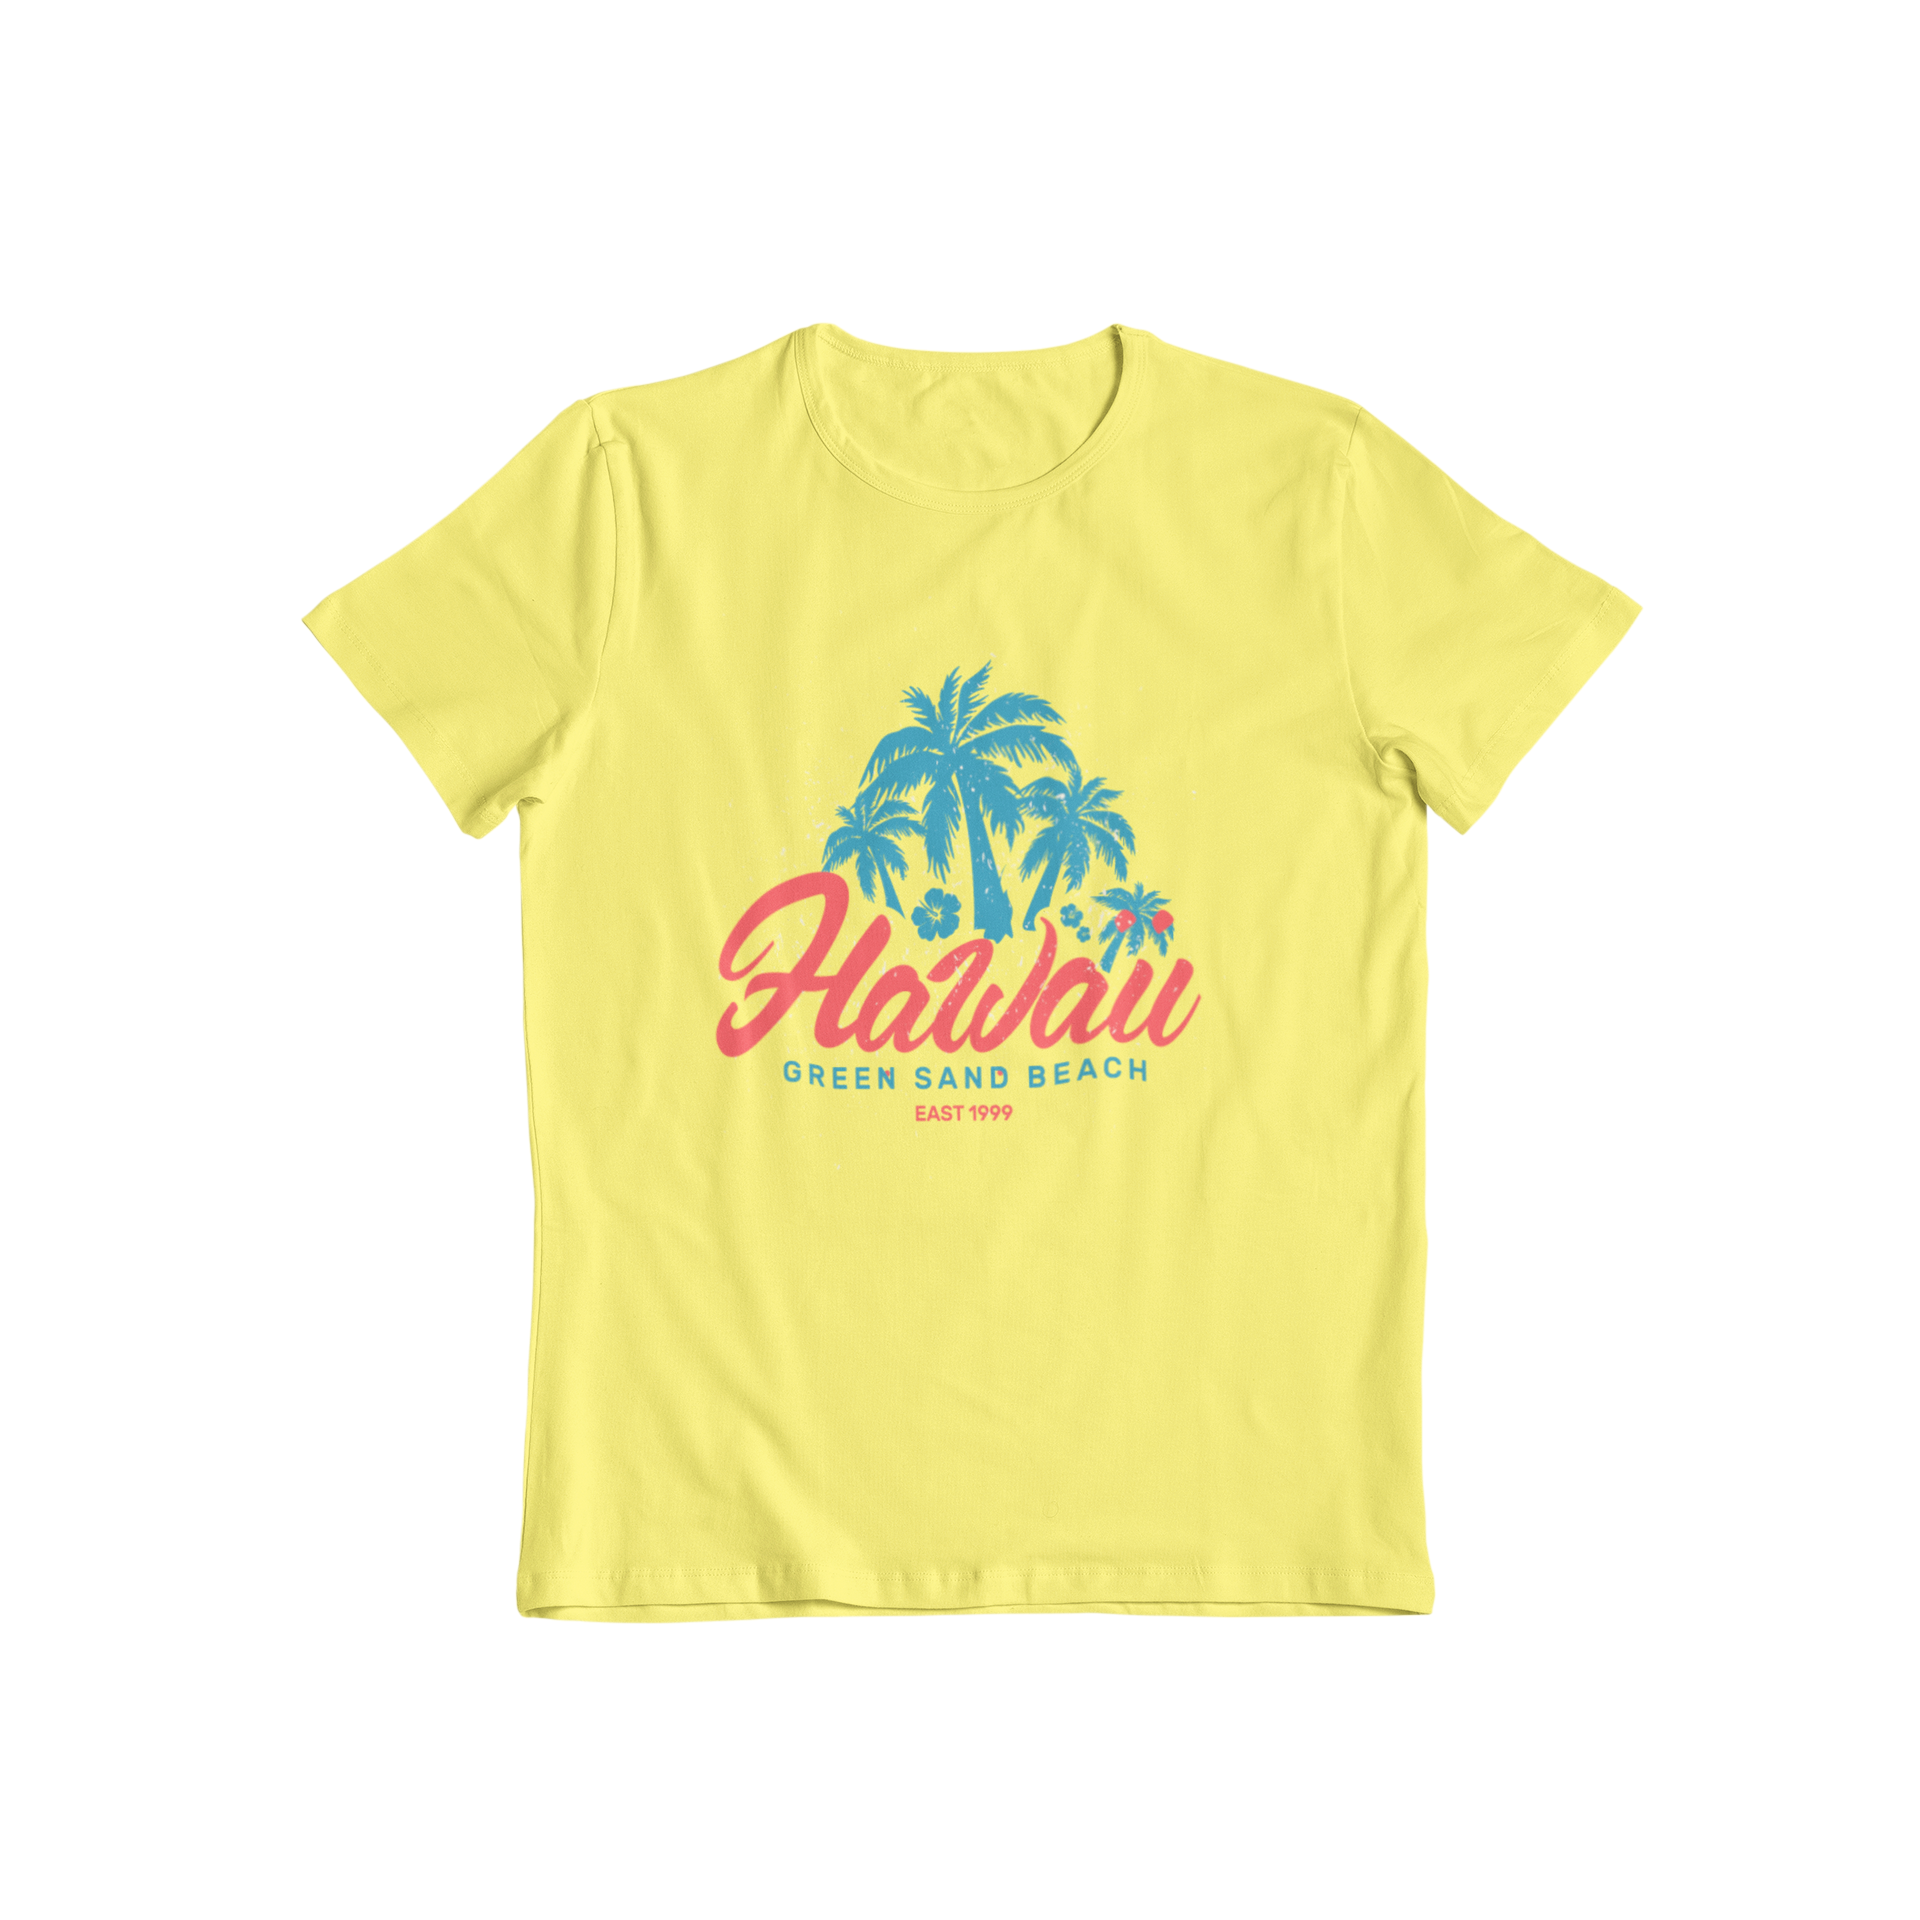 Looking for a t-shirt that is perfect for the beach? Look no further than Teevolution! Our Hawaii Sands Beach t-shirt is the perfect combination of style and comfort. Get ready to hit the beach in style with Teevolution!